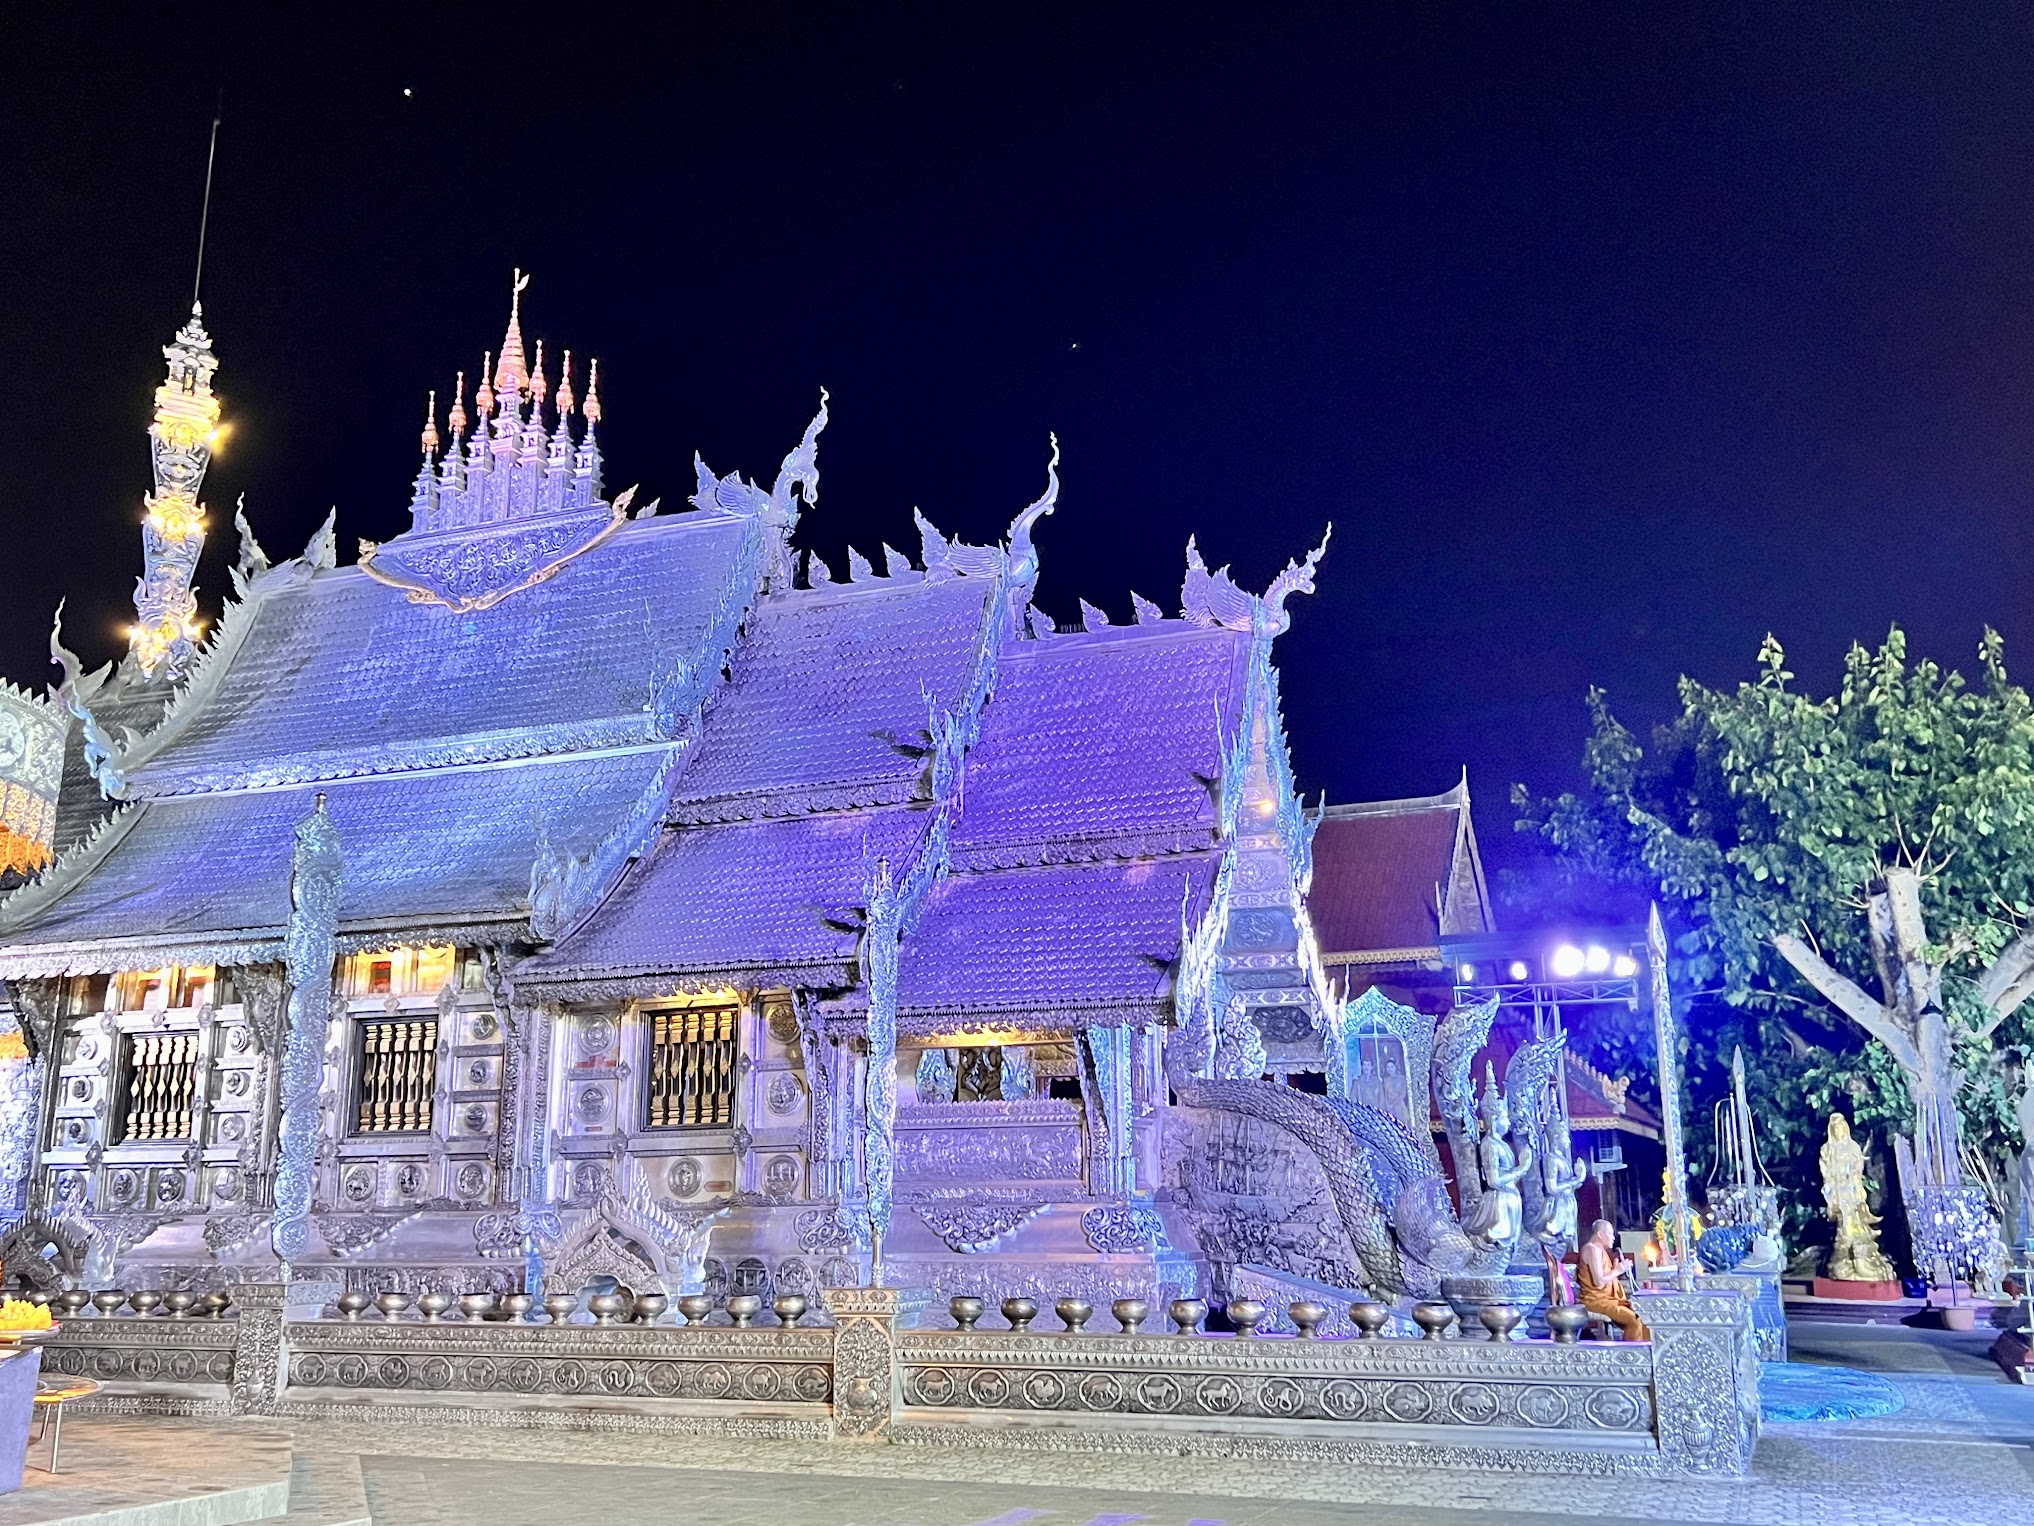 Ornate silver temple viewed from the side and lit up at night with purple lights. There is a monk dressed in orange robes sitting at the front of the temple.